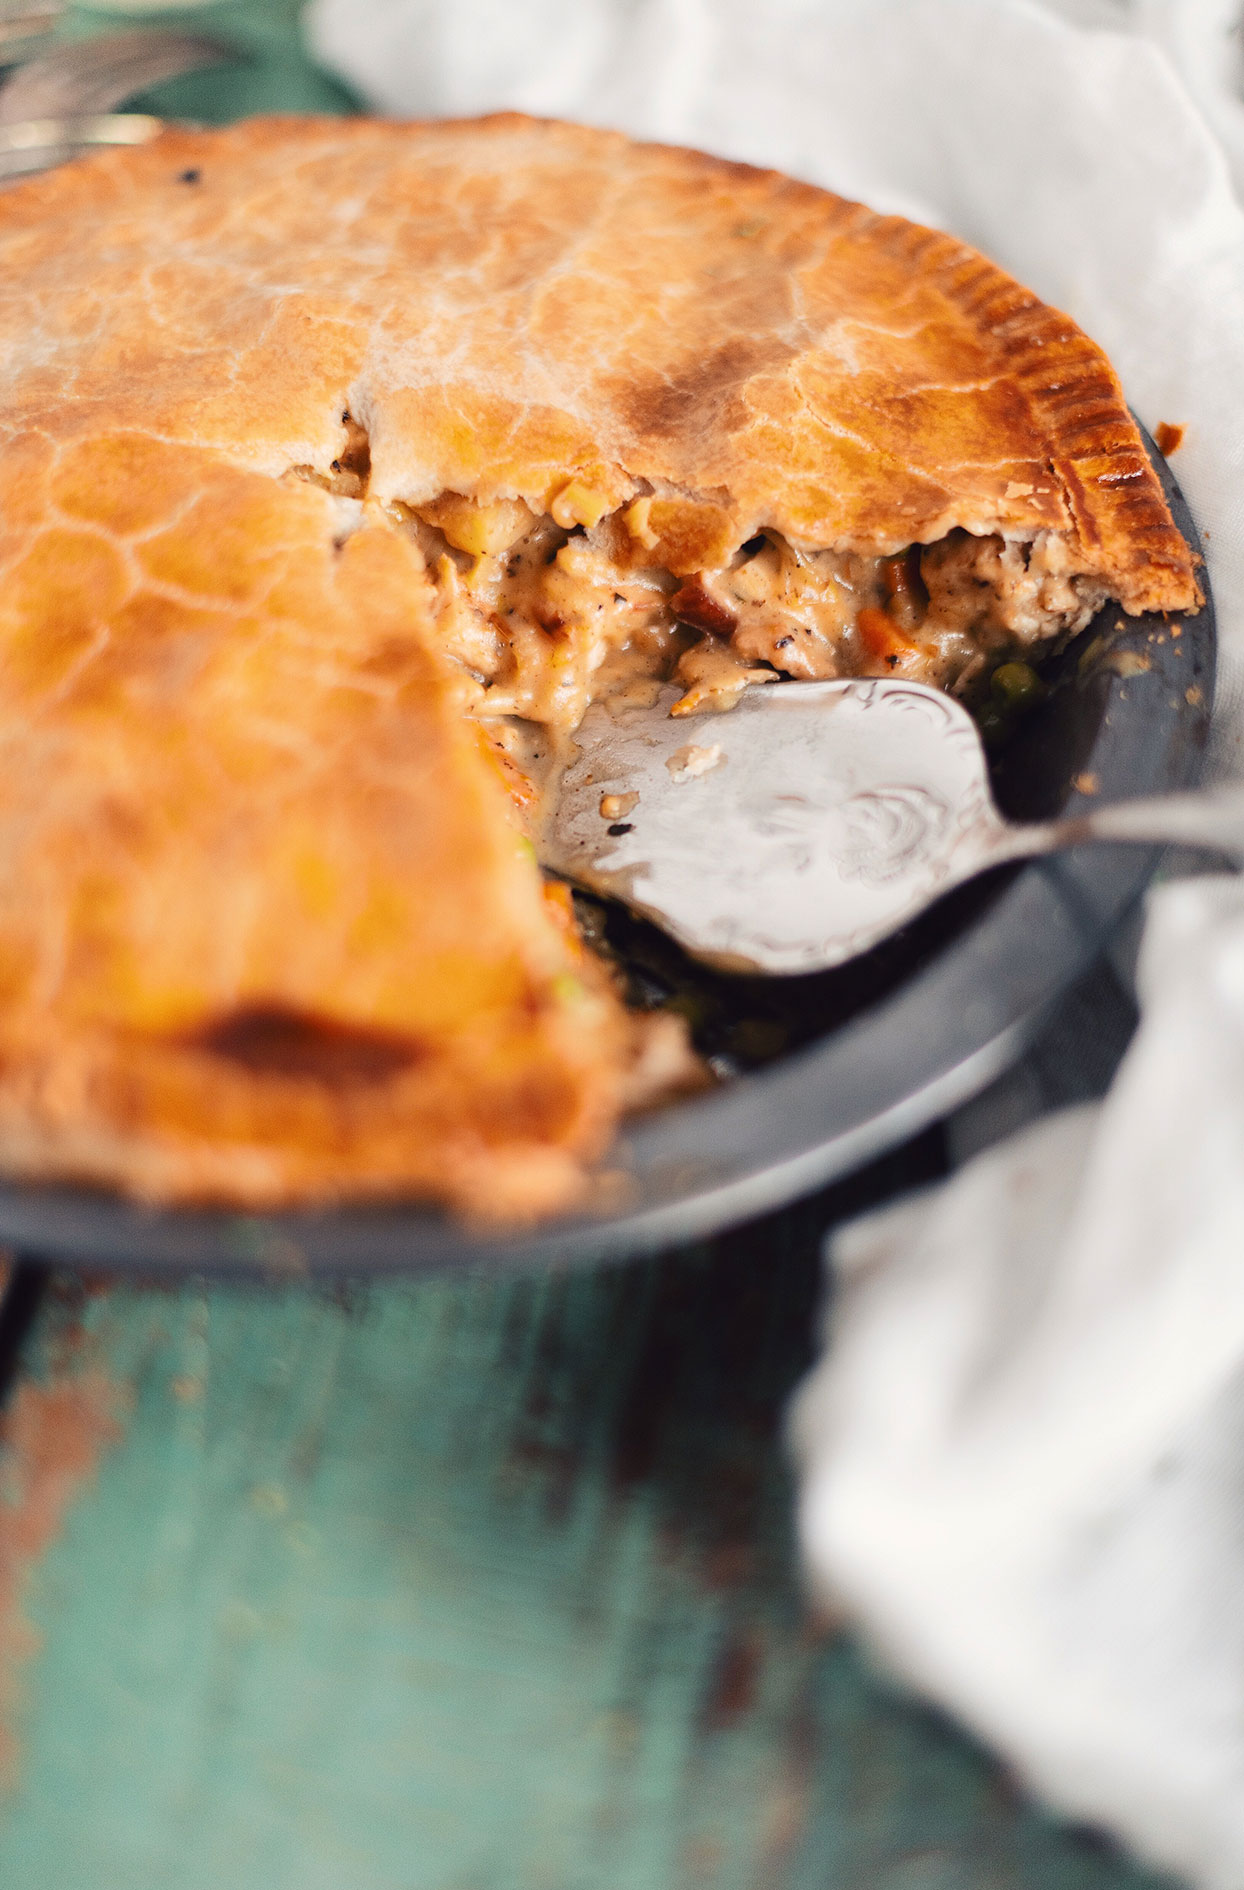 Turkey pie with leek, bacon and white beer